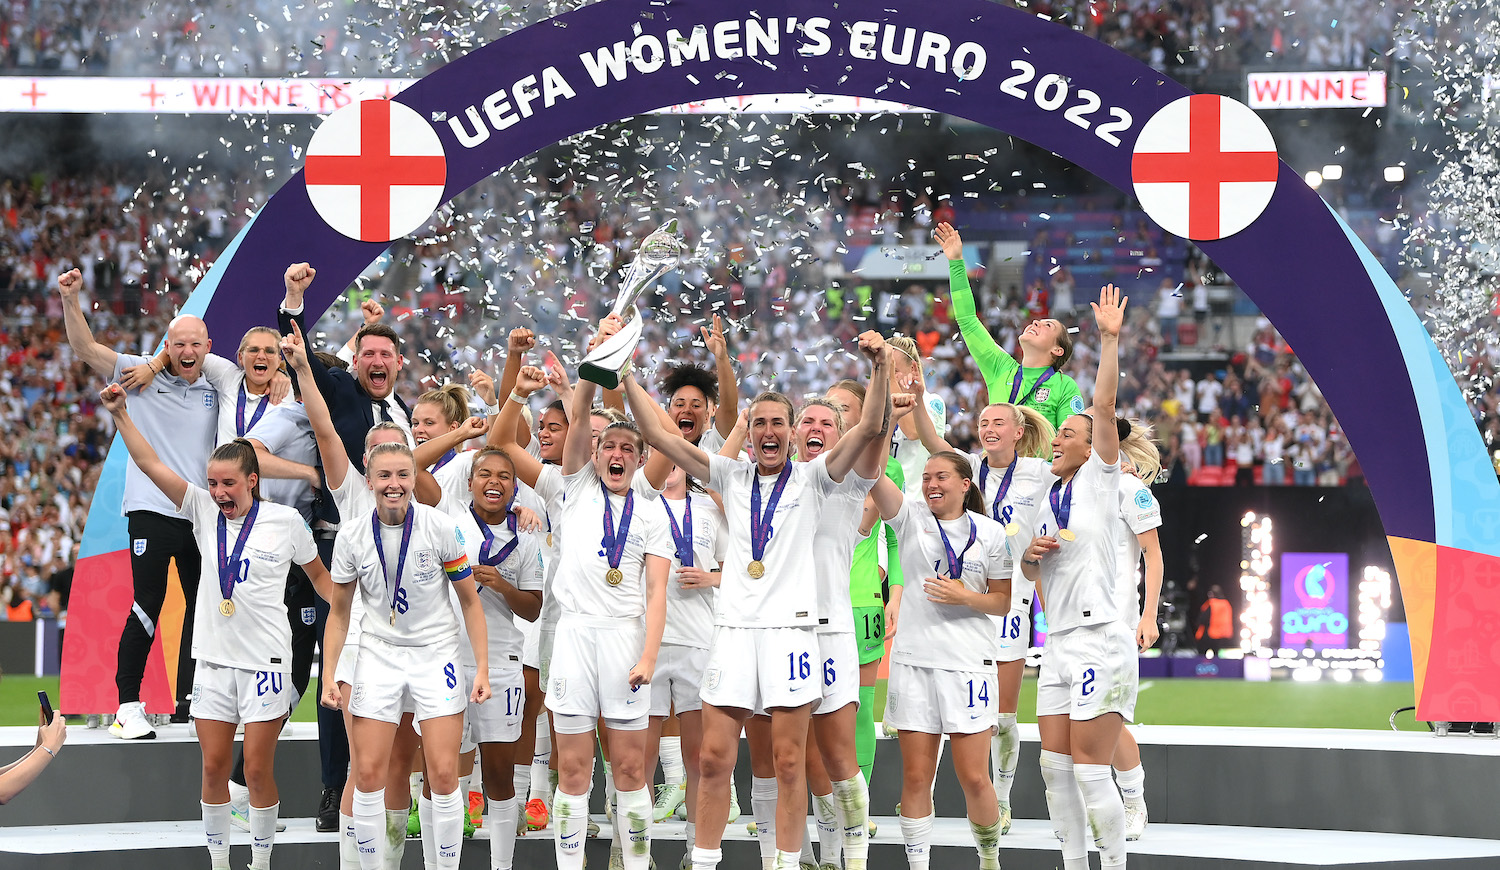 LONDON, ENGLAND - JULY 31: Leah Williamson of England lifts the UEFA Women's EURO 2022 Trophy after their side's victory during the UEFA Women's Euro 2022 final match between England and Germany at Wembley Stadium on July 31, 2022 in London, England. (Photo by Shaun Botterill/Getty Images)